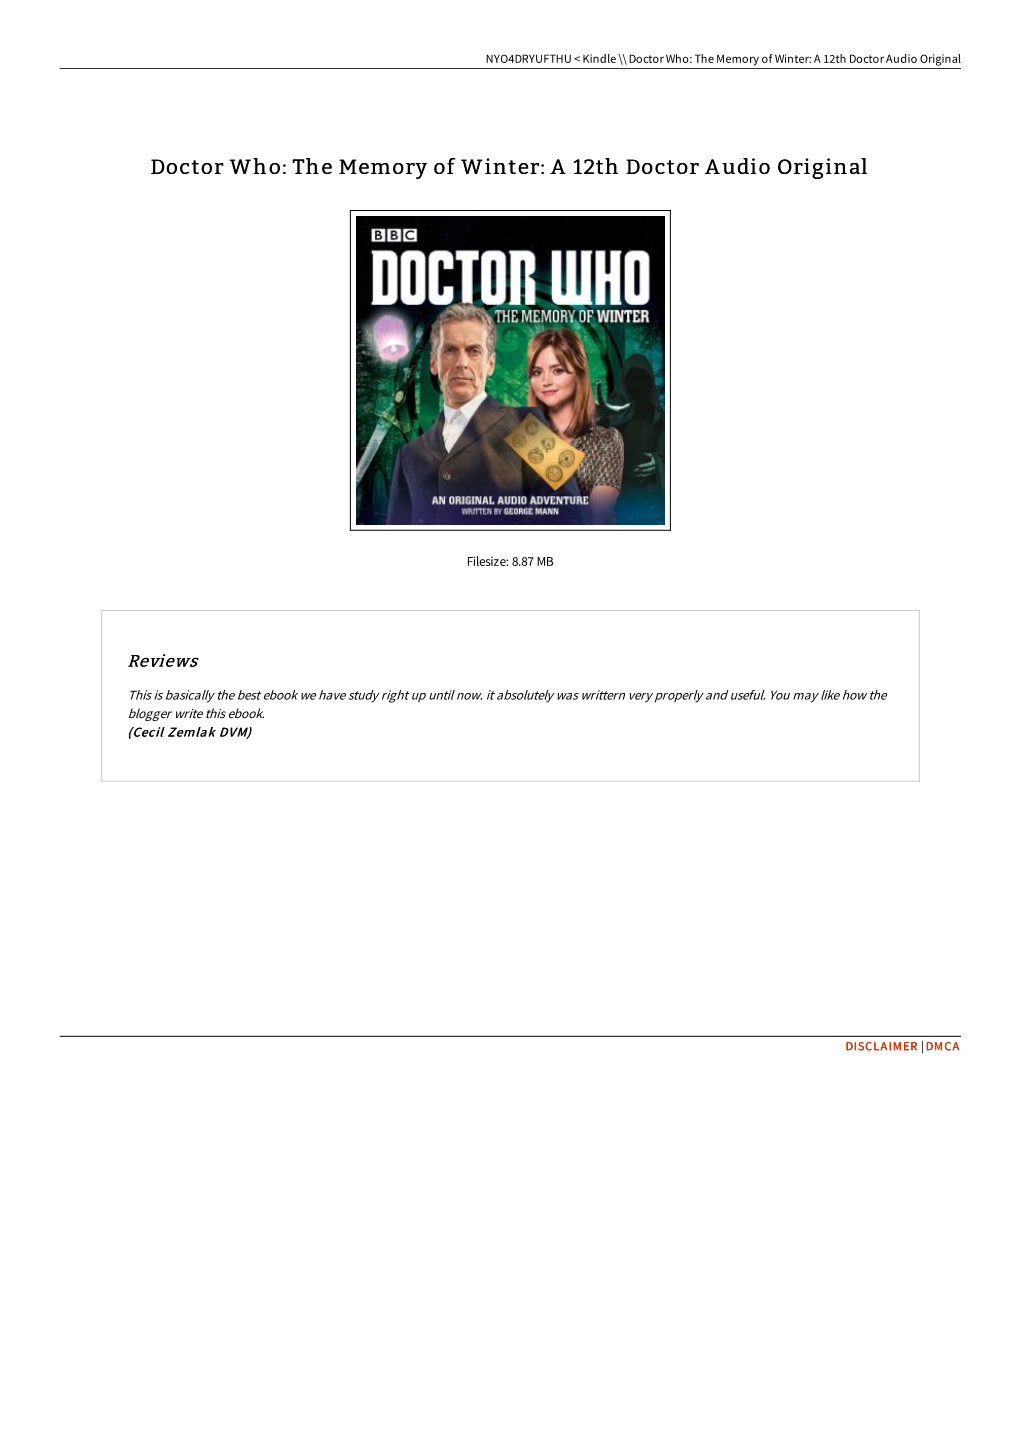 Doctor Who: the Memory of Winter: a 12Th Doctor Audio Original